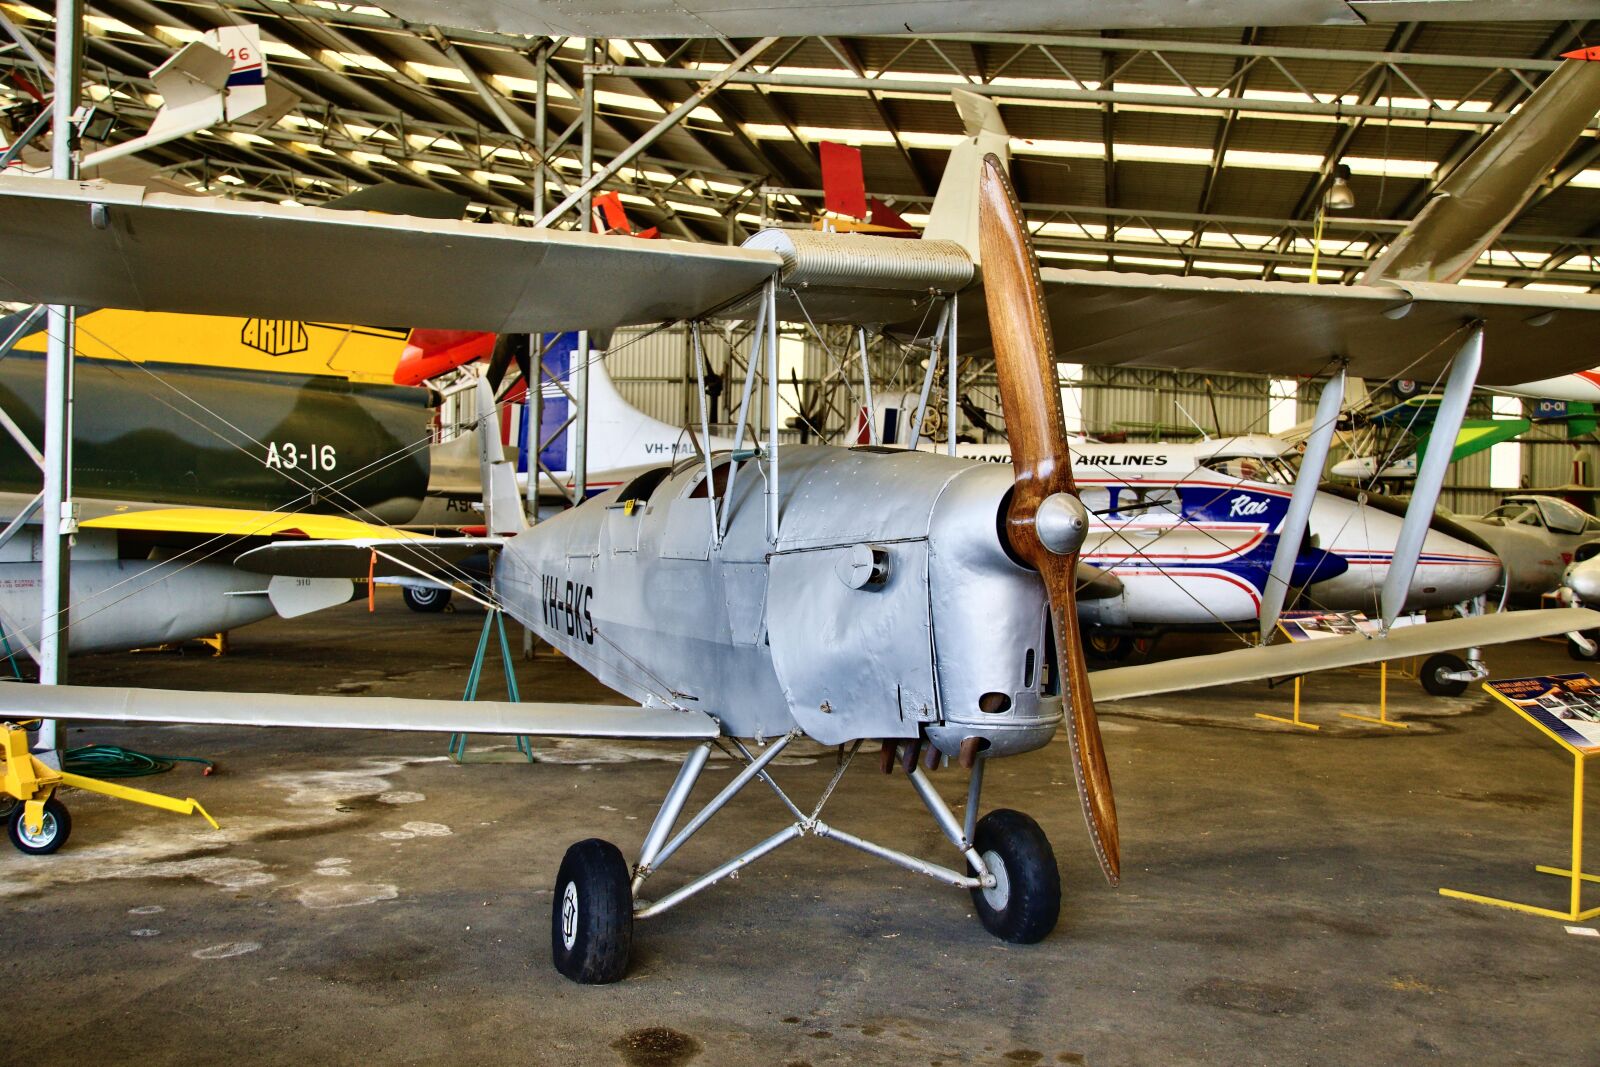 Sony a6500 sample photo. Biplane, museum, vintage photography